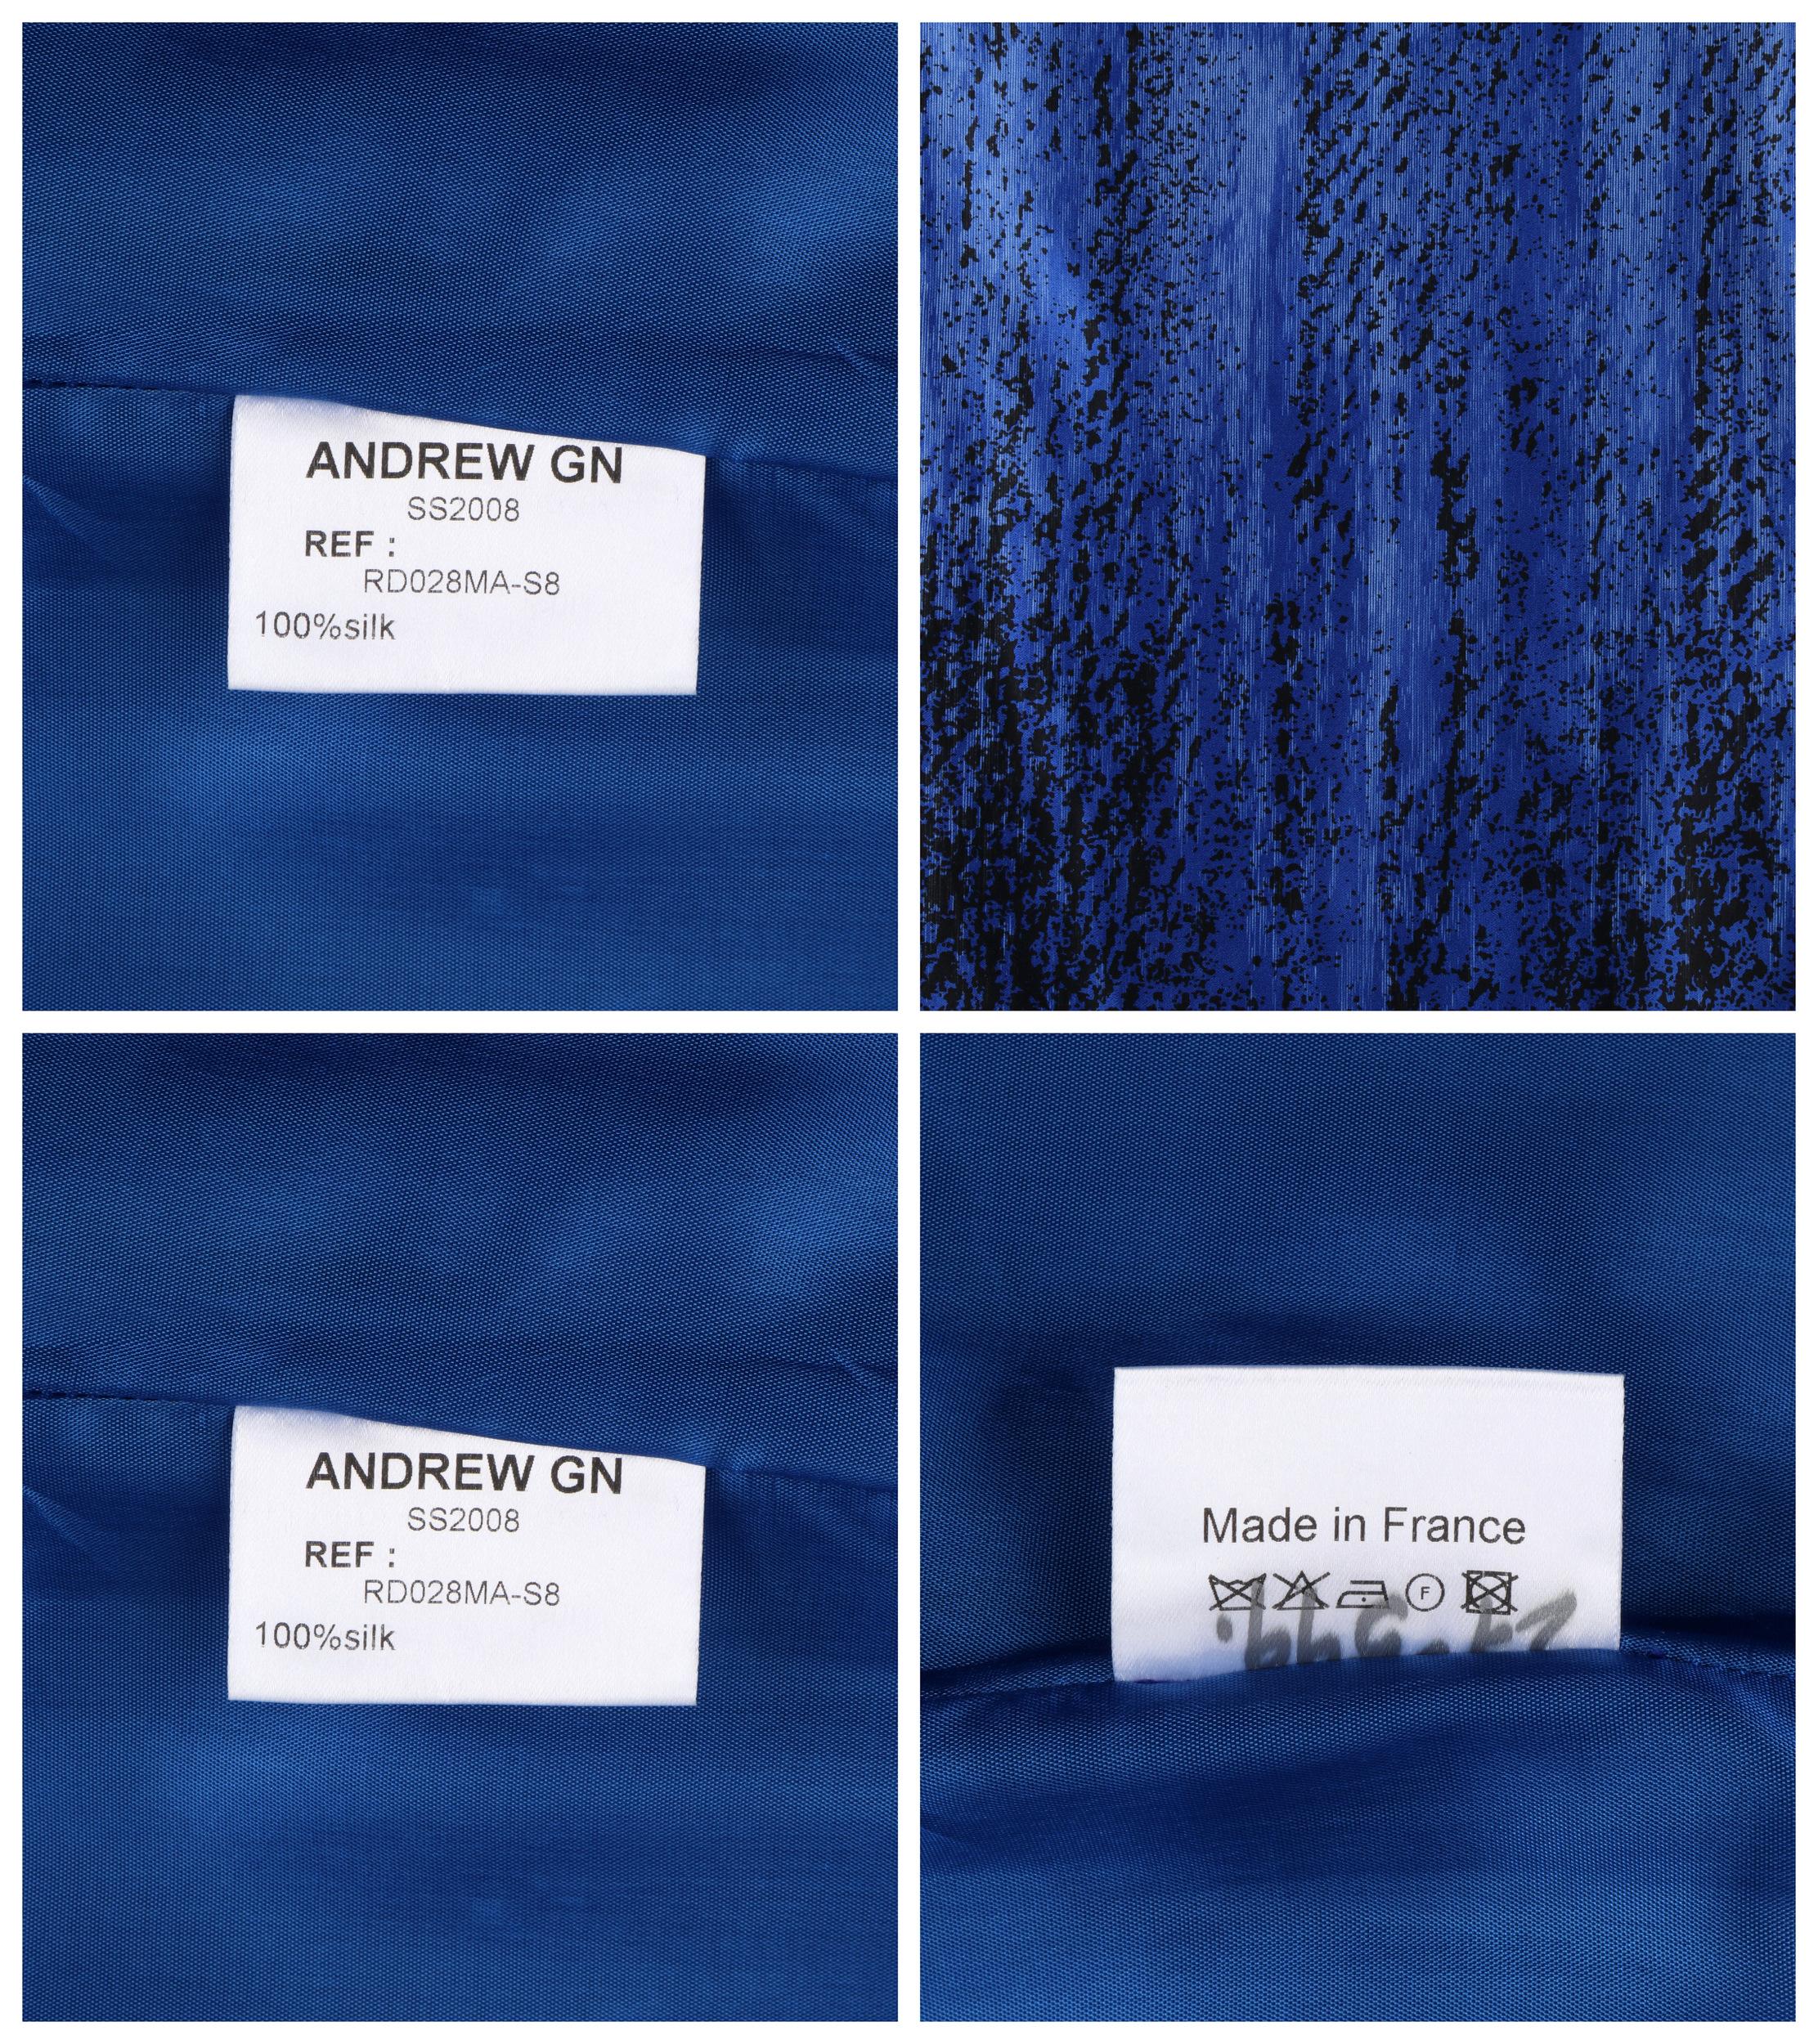 Women's ANDREW GN S/S 2008 Blue Black Ombre Silk Pleat Balloon Dress Patent Leather Bow 